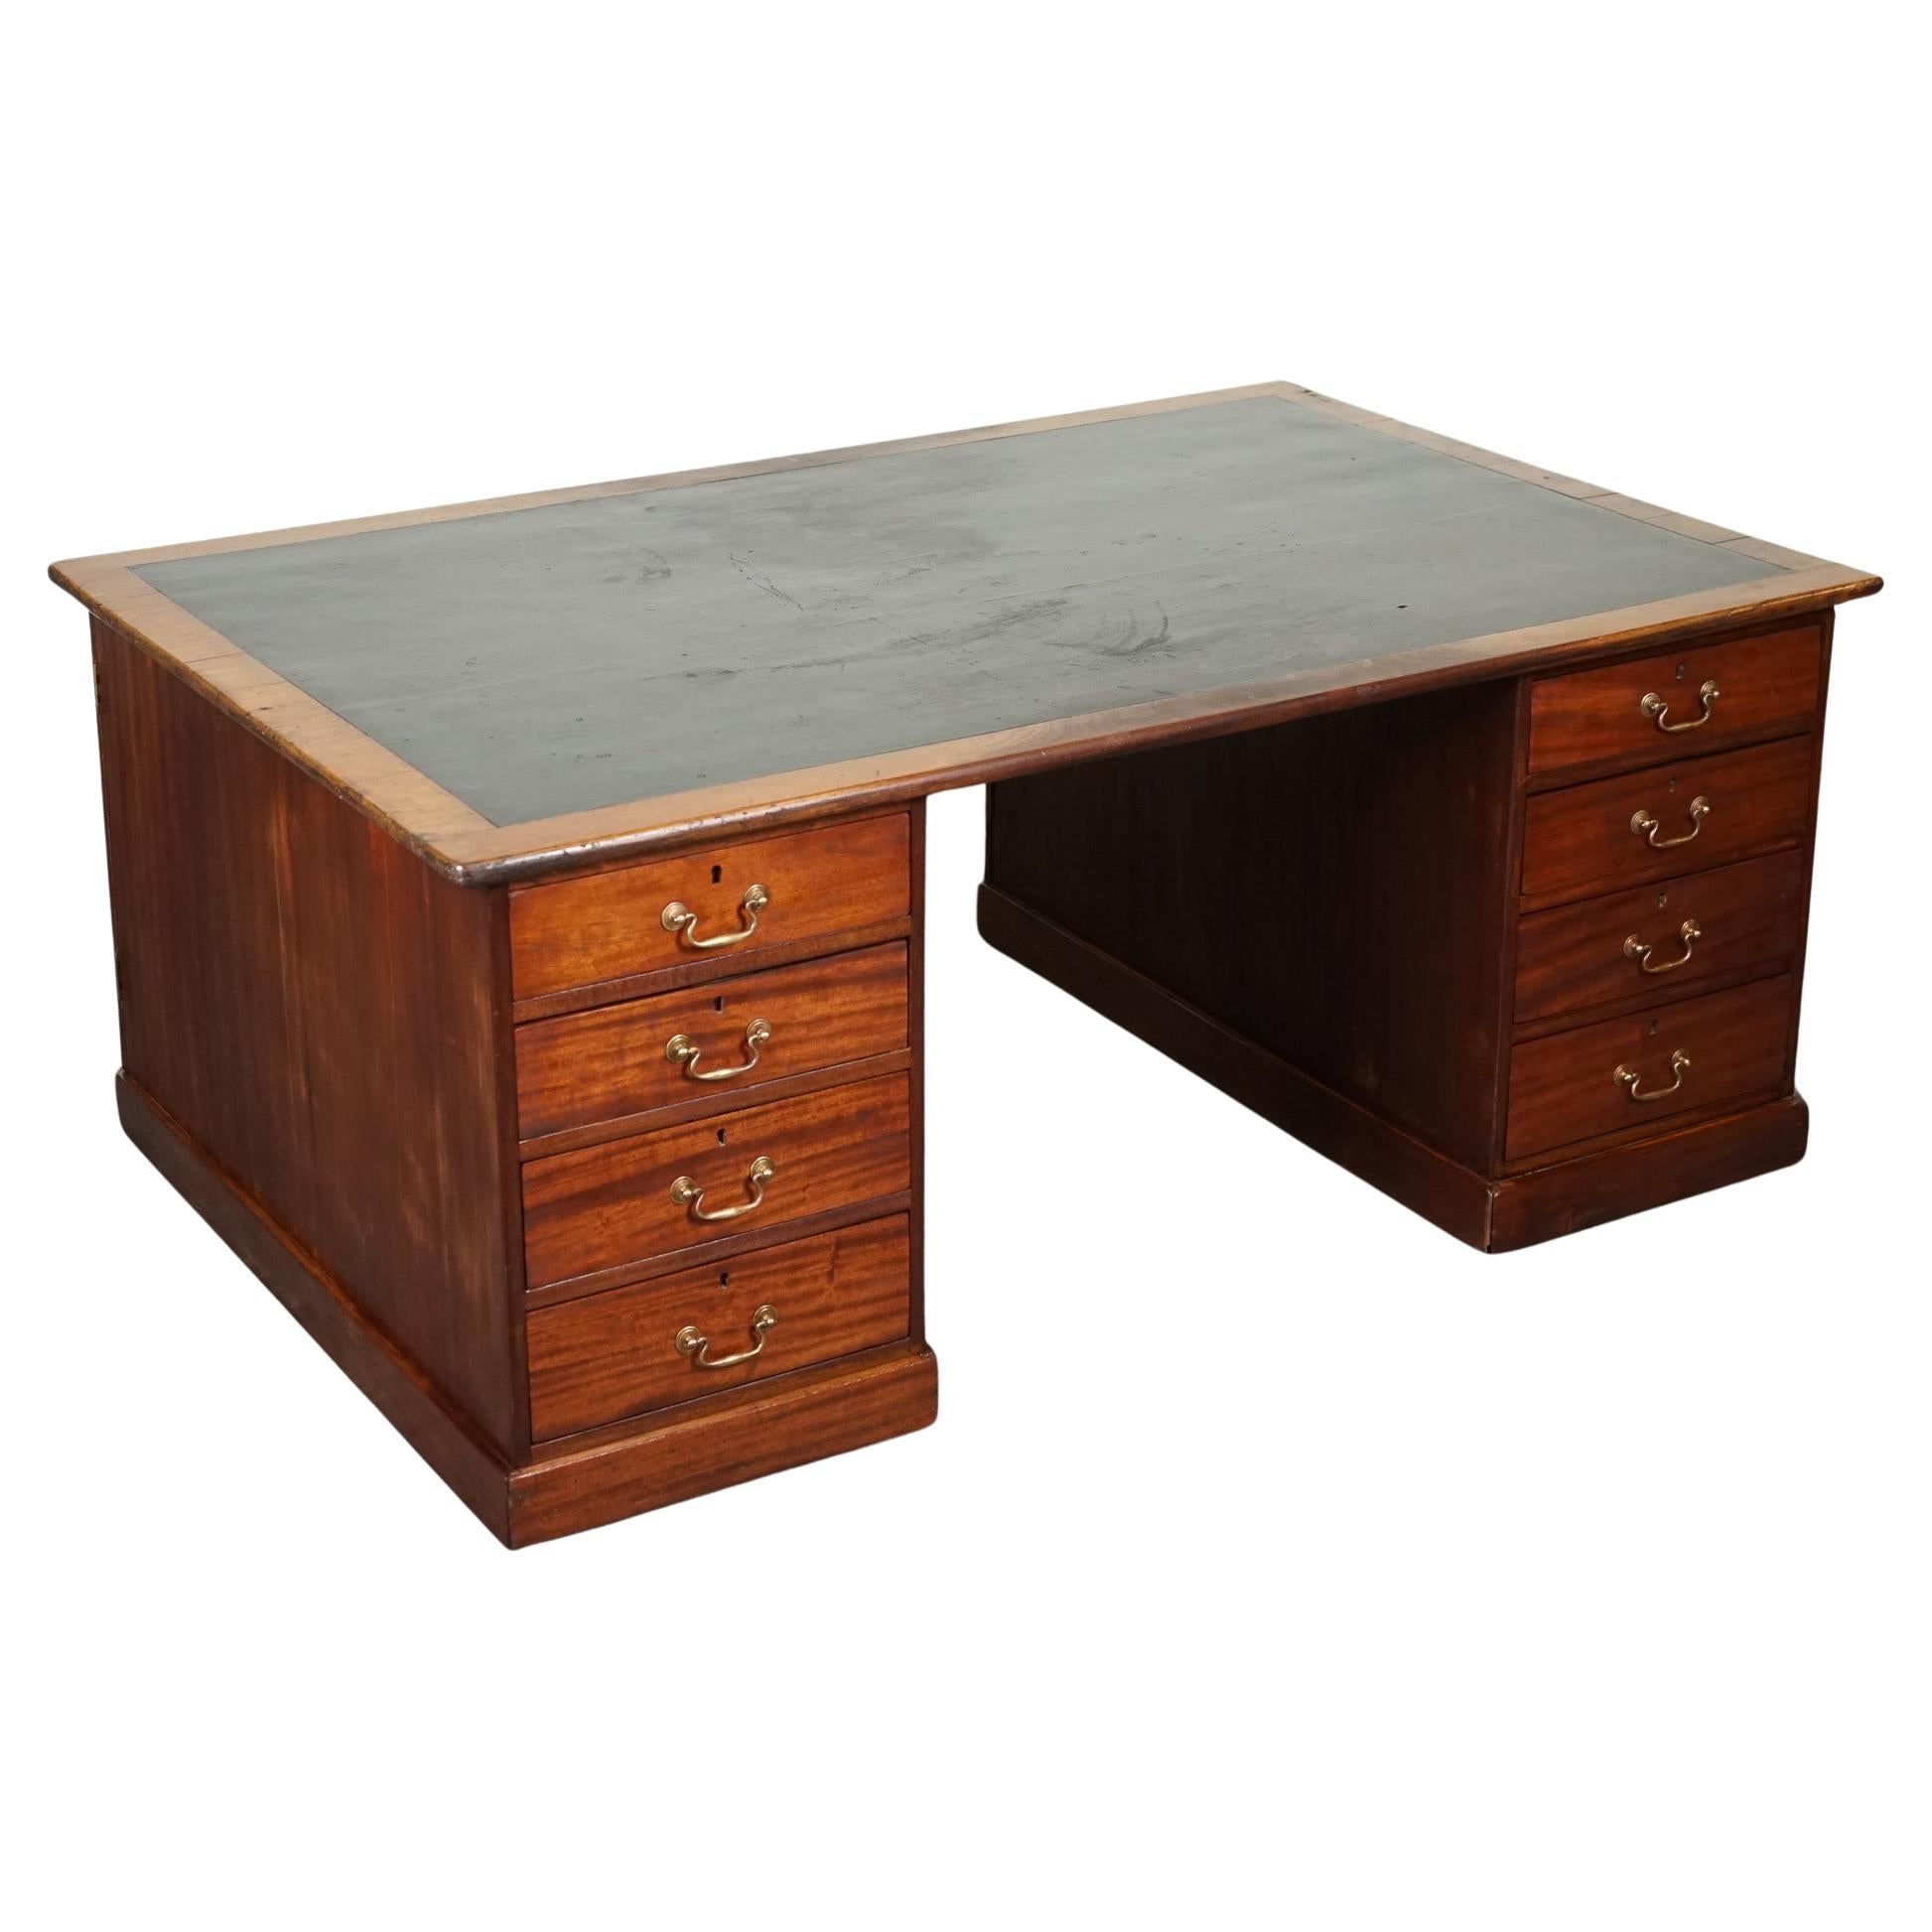 ANTIQUE HUGE DISTRESSED PARTNERS DESK WITH NAVY BLUE LEATHER TOP j1 For Sale